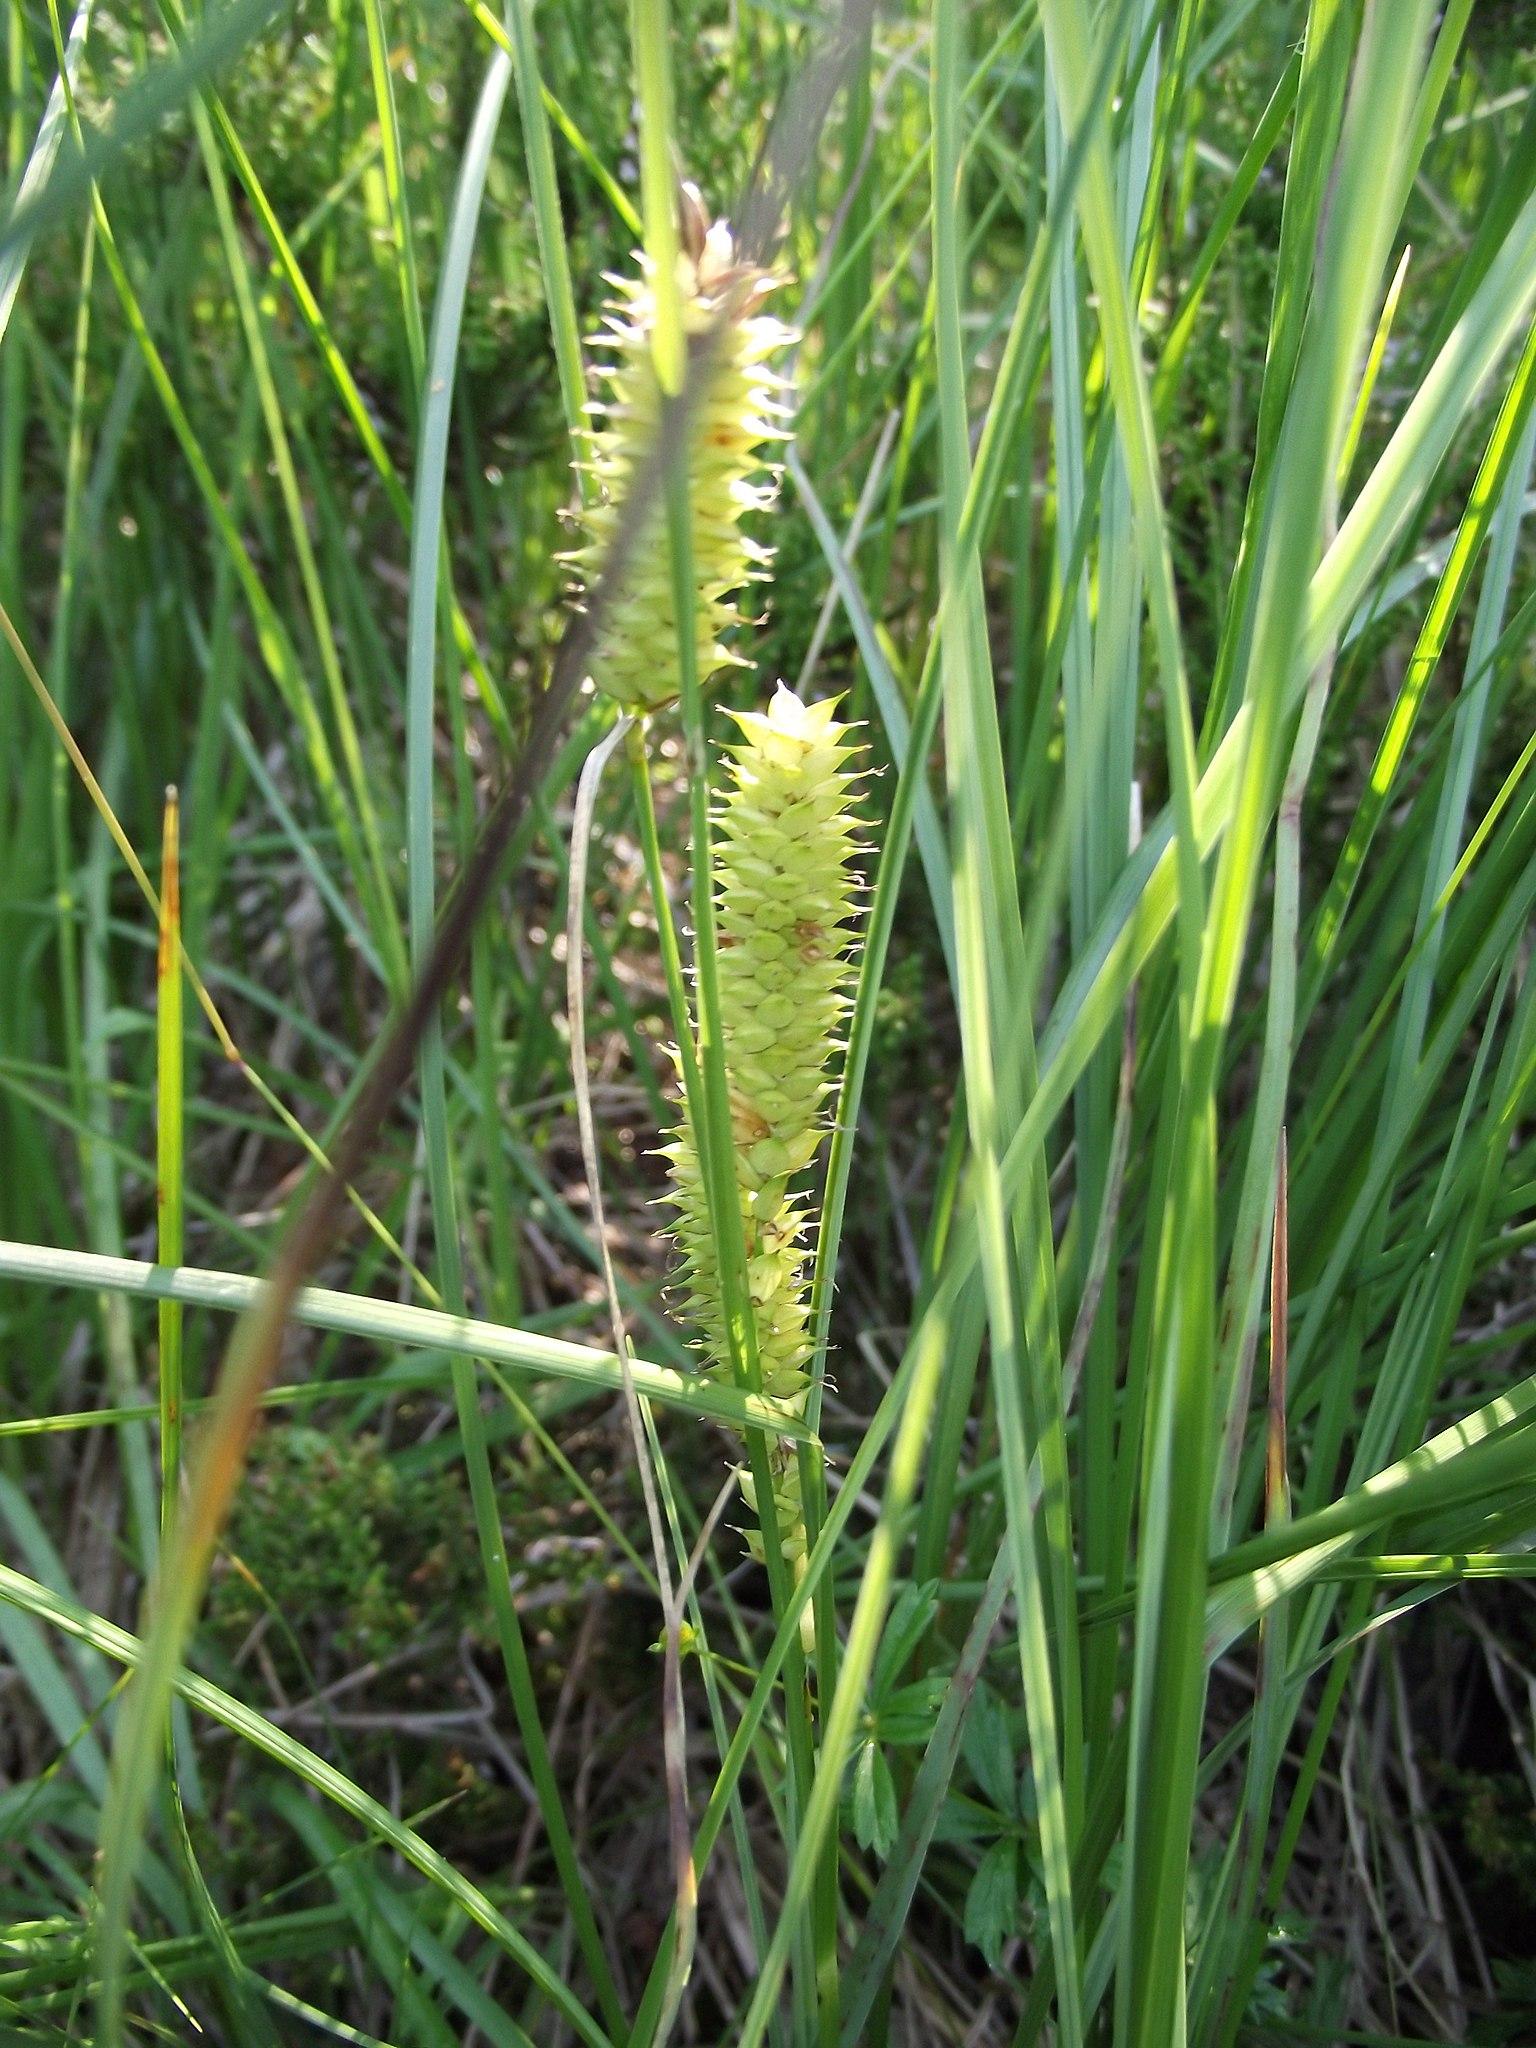 light-lime spikelets with green foliage and stems